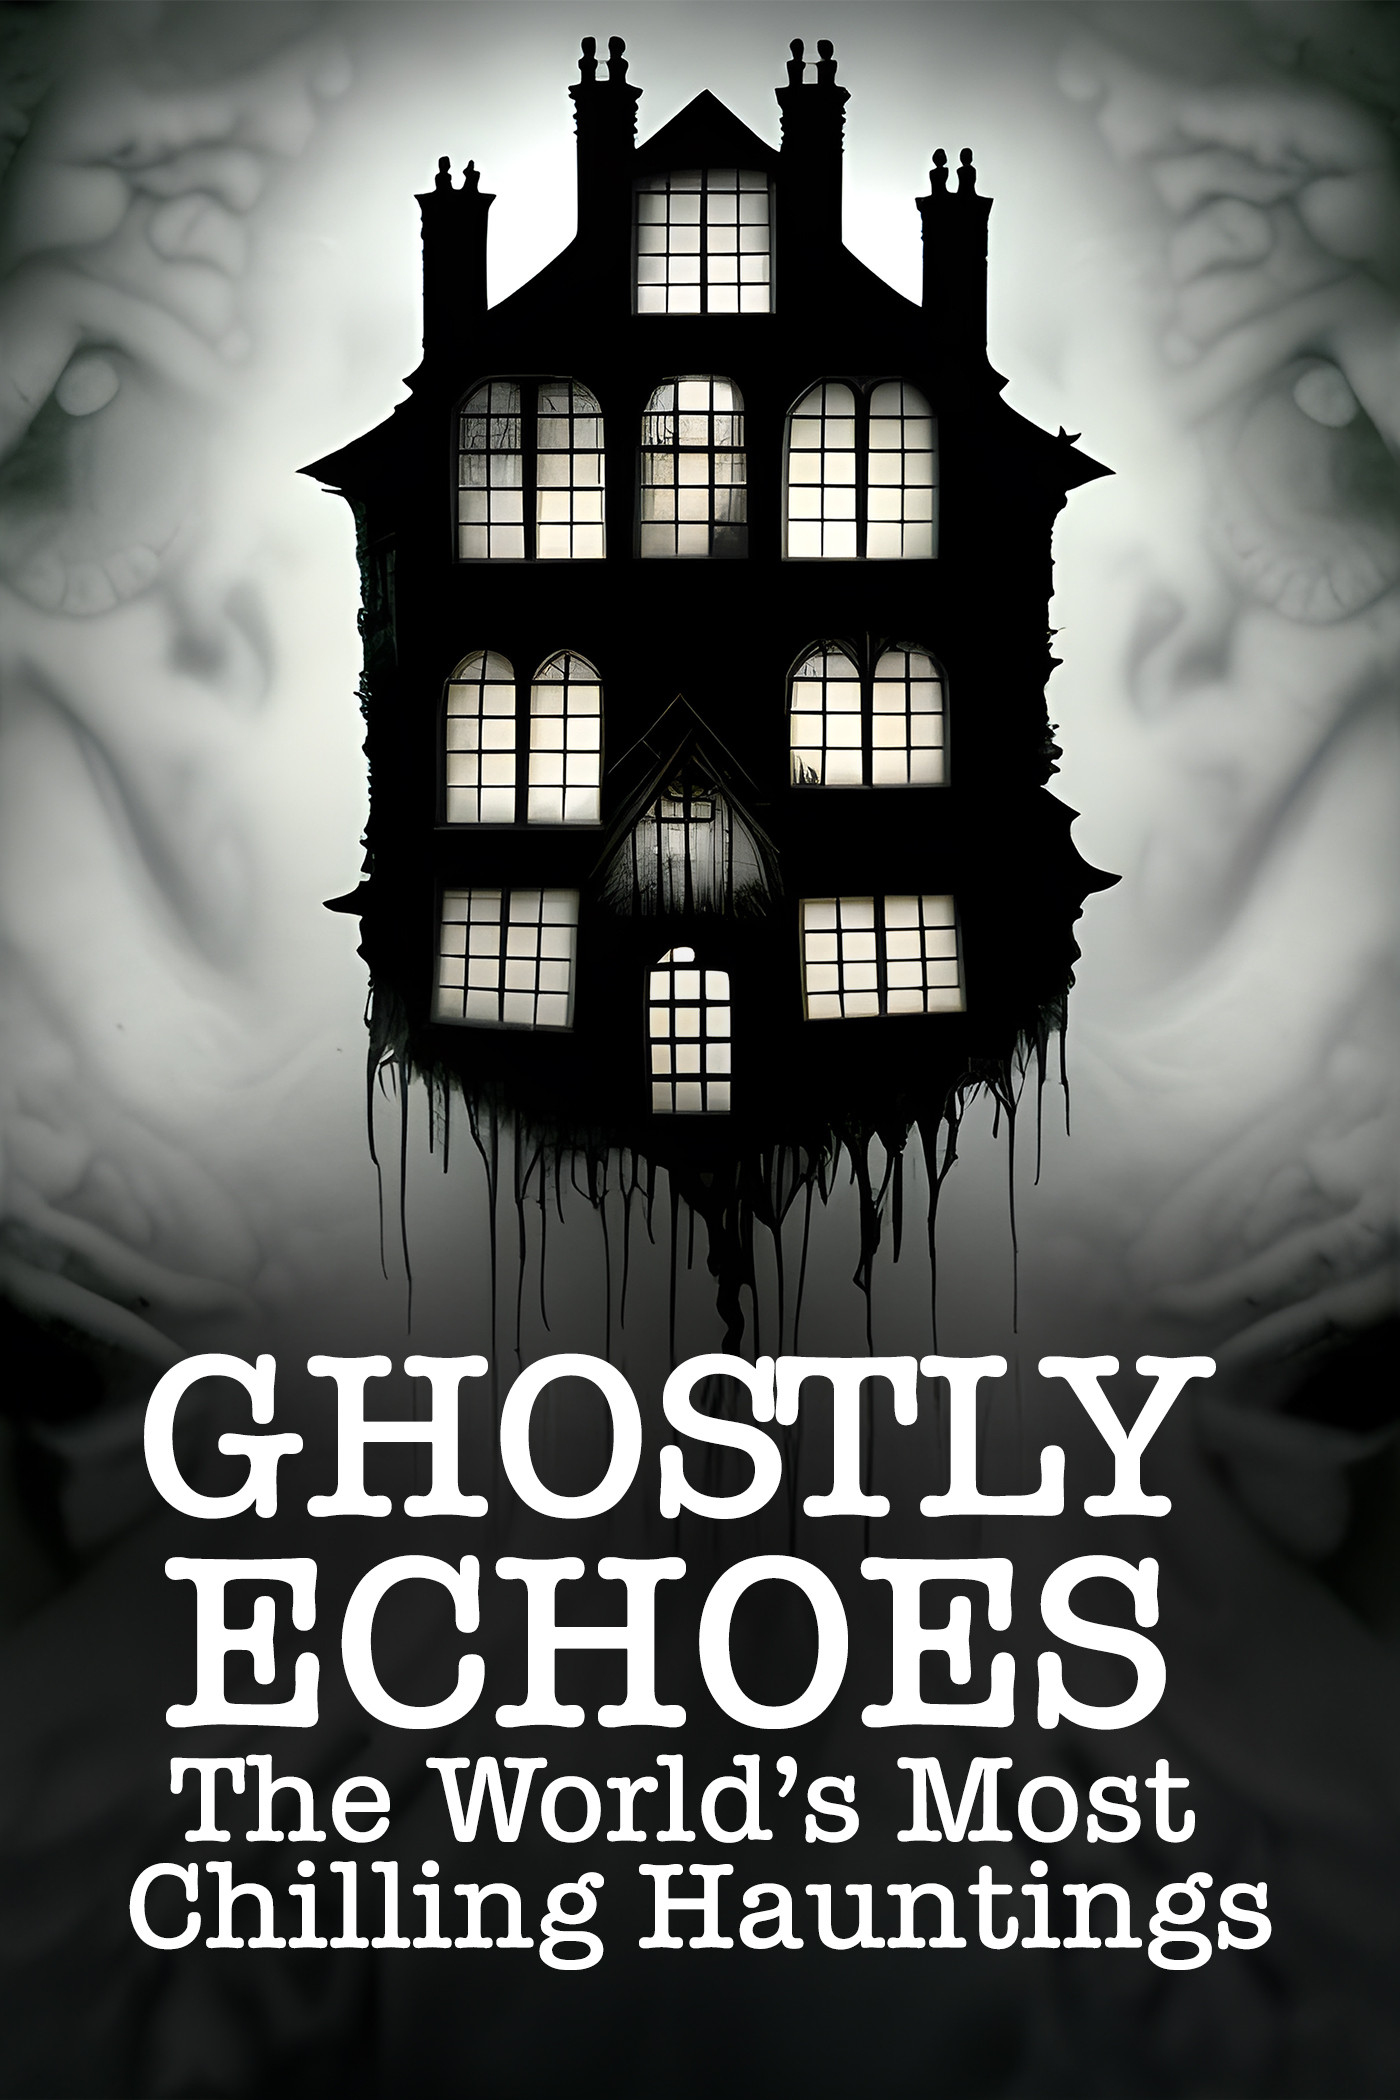 Ghostly Echoes: The World's Most Chilling Hauntings